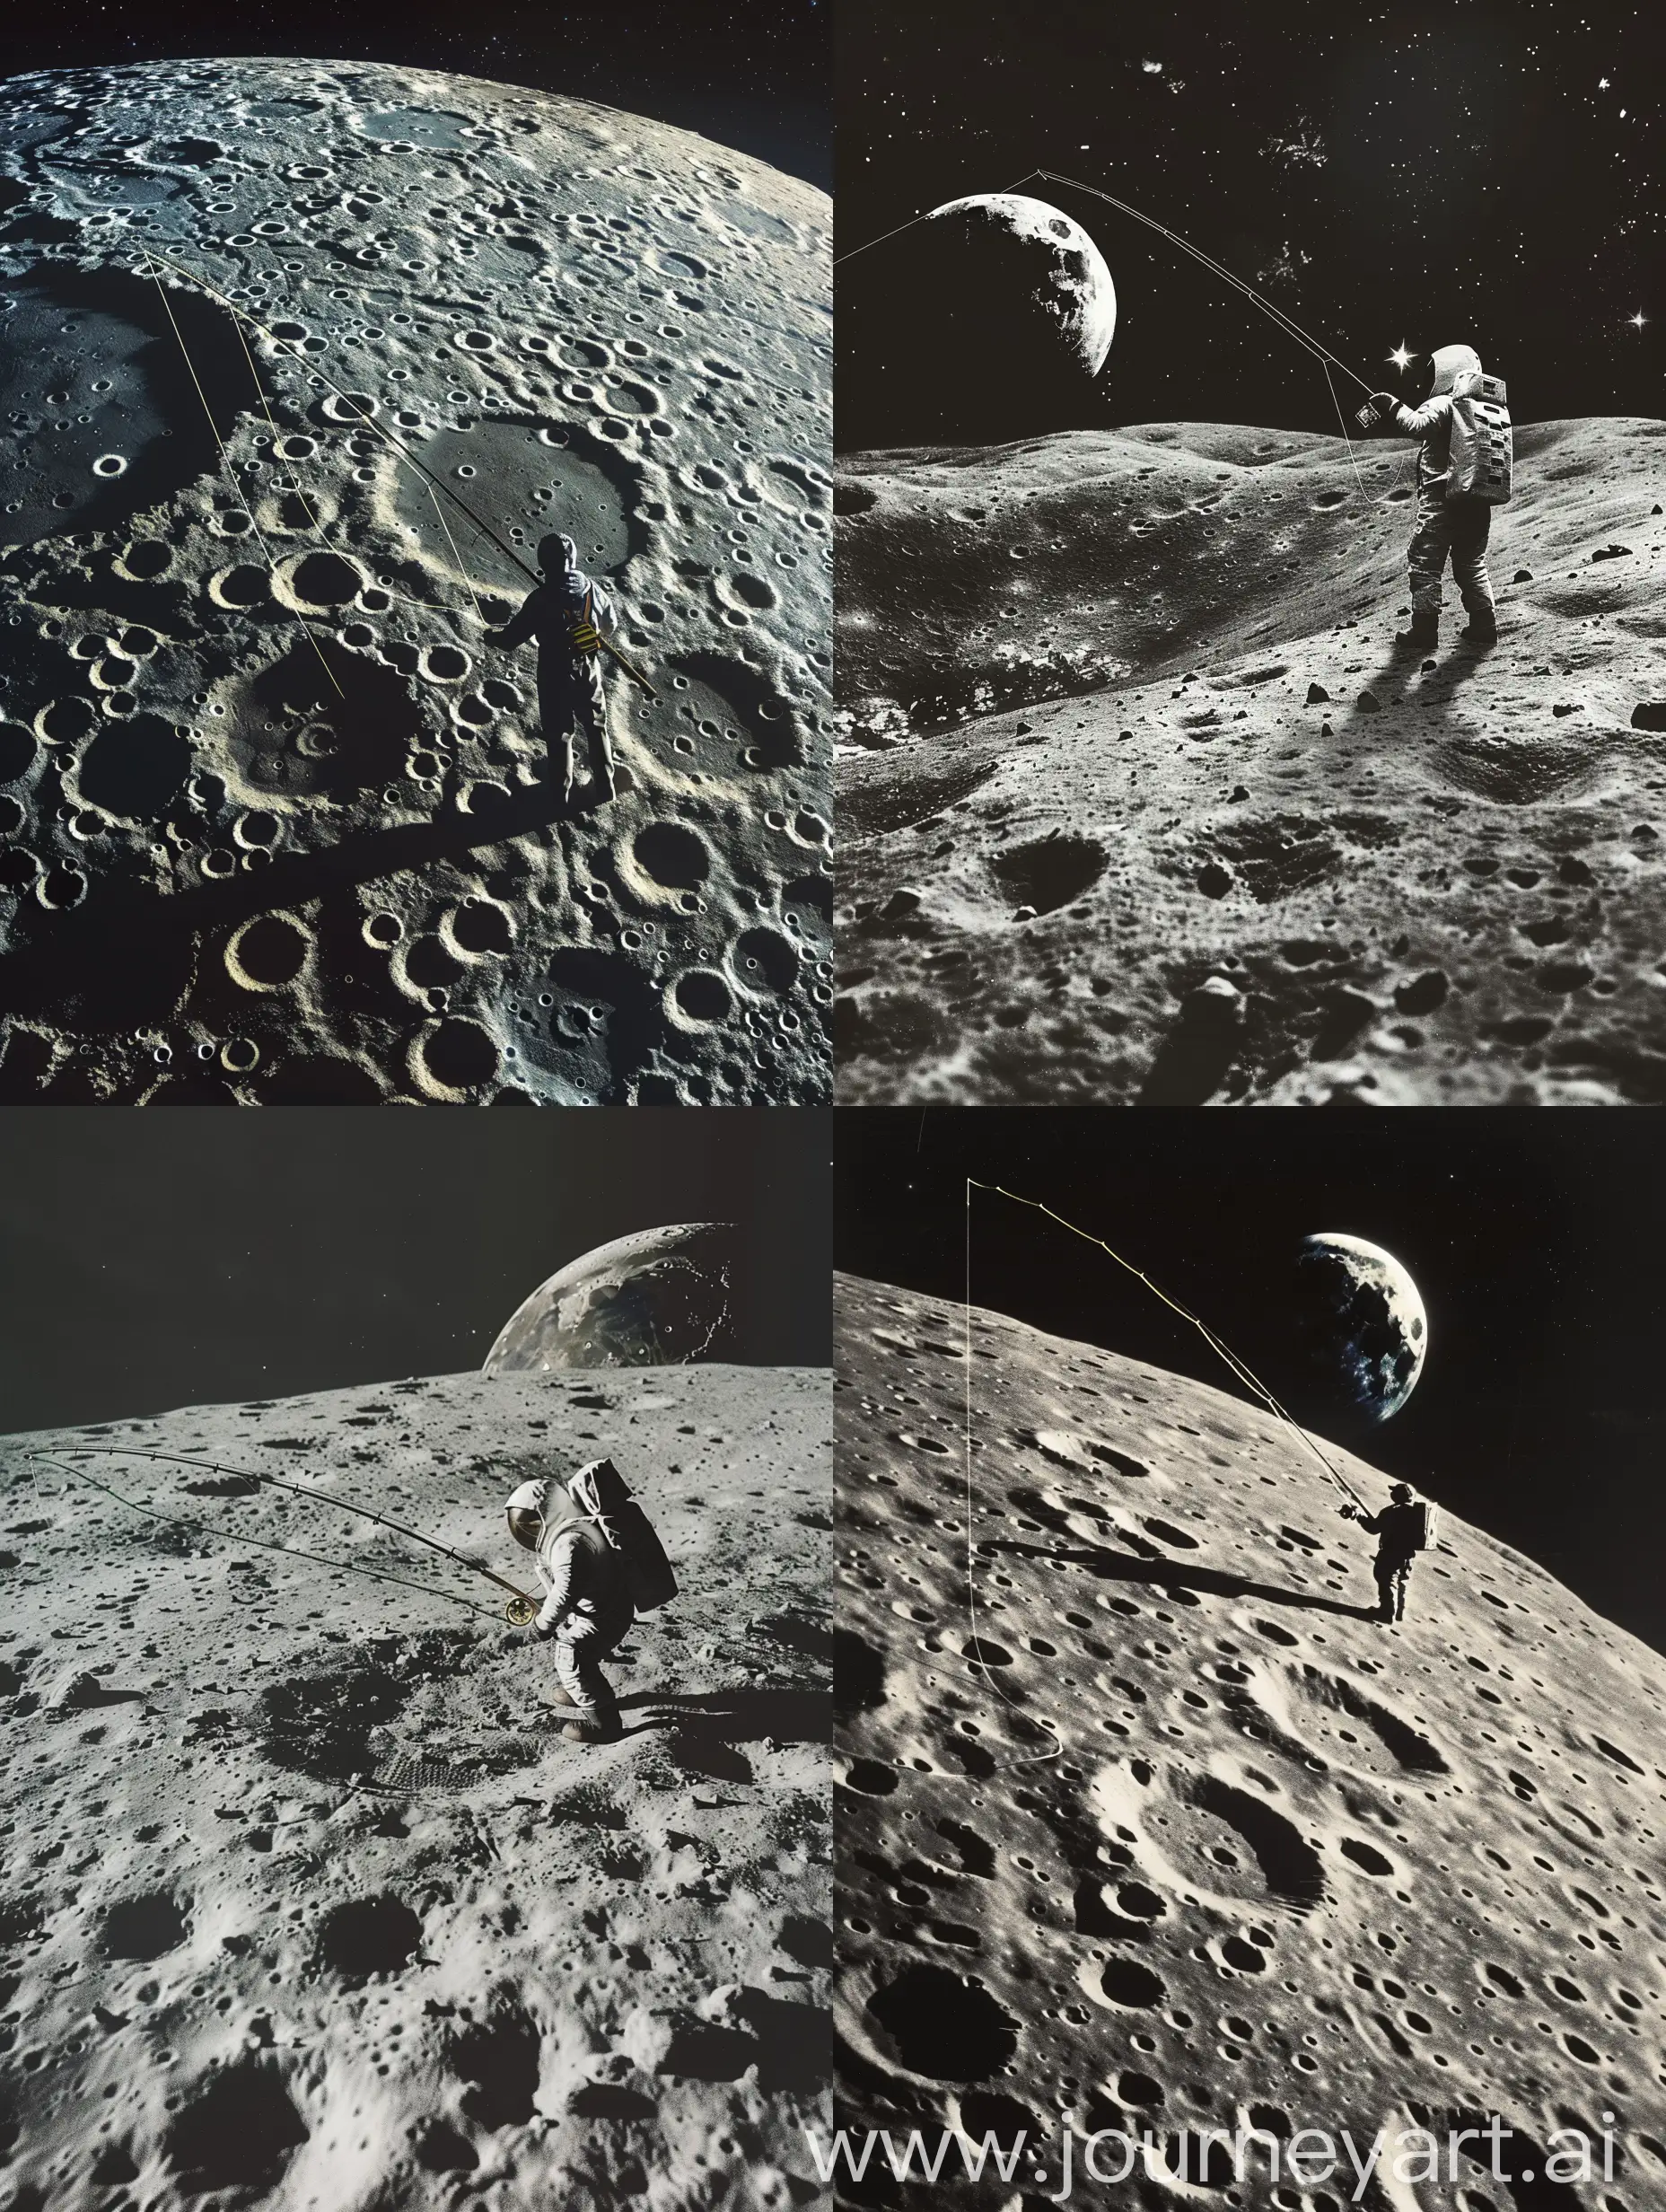 A fisherman is fishing on the moon, the lunar surface